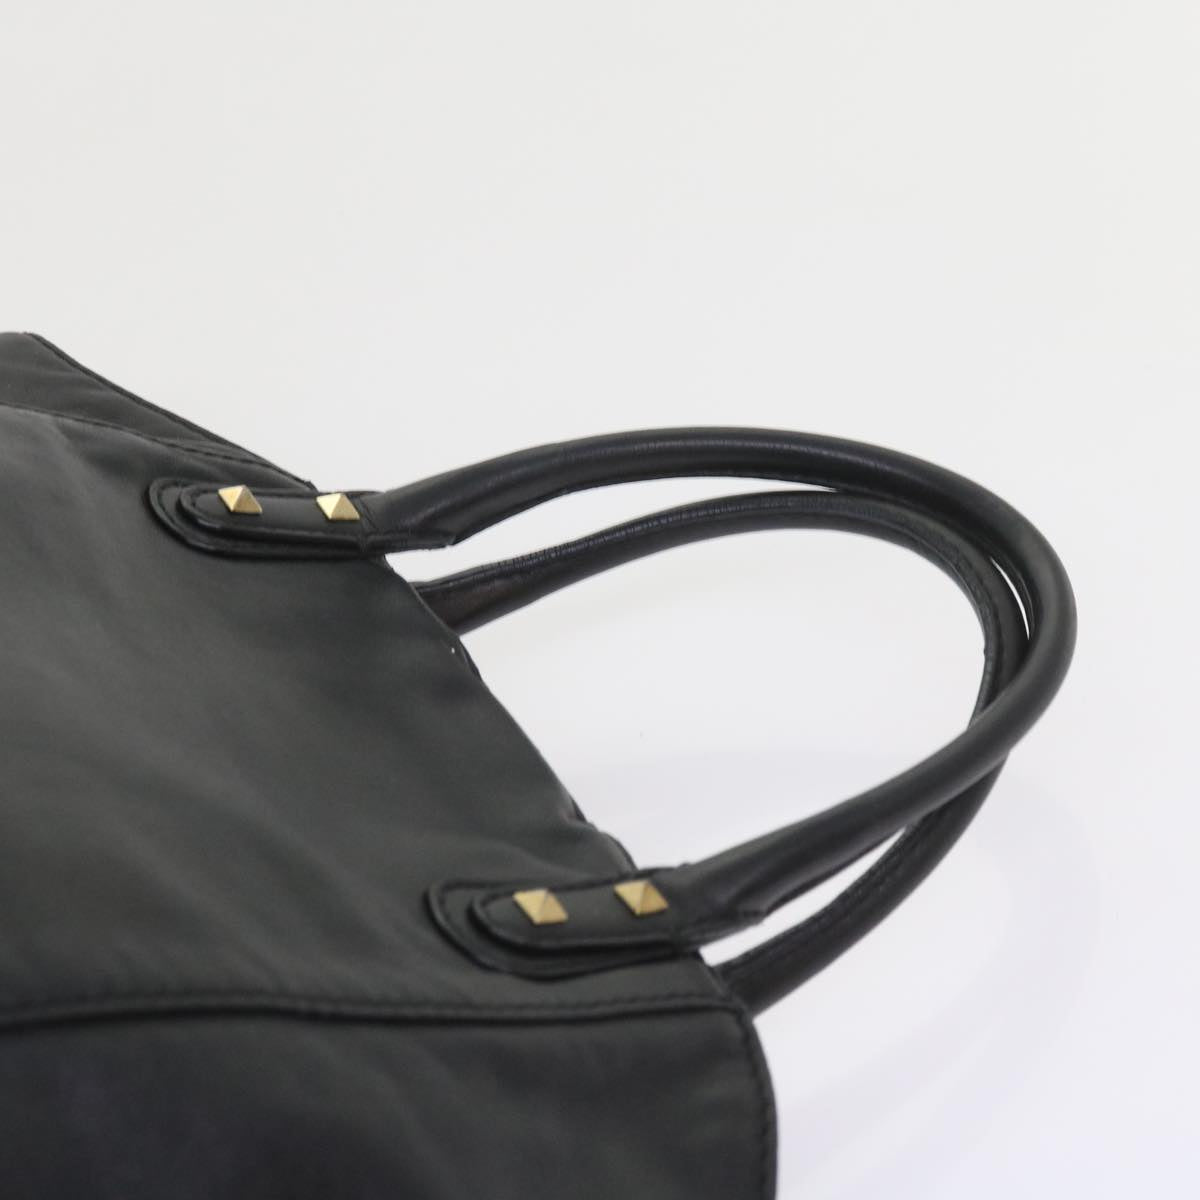 VALENTINO Hand Bag Leather 2way Black Auth bs9820